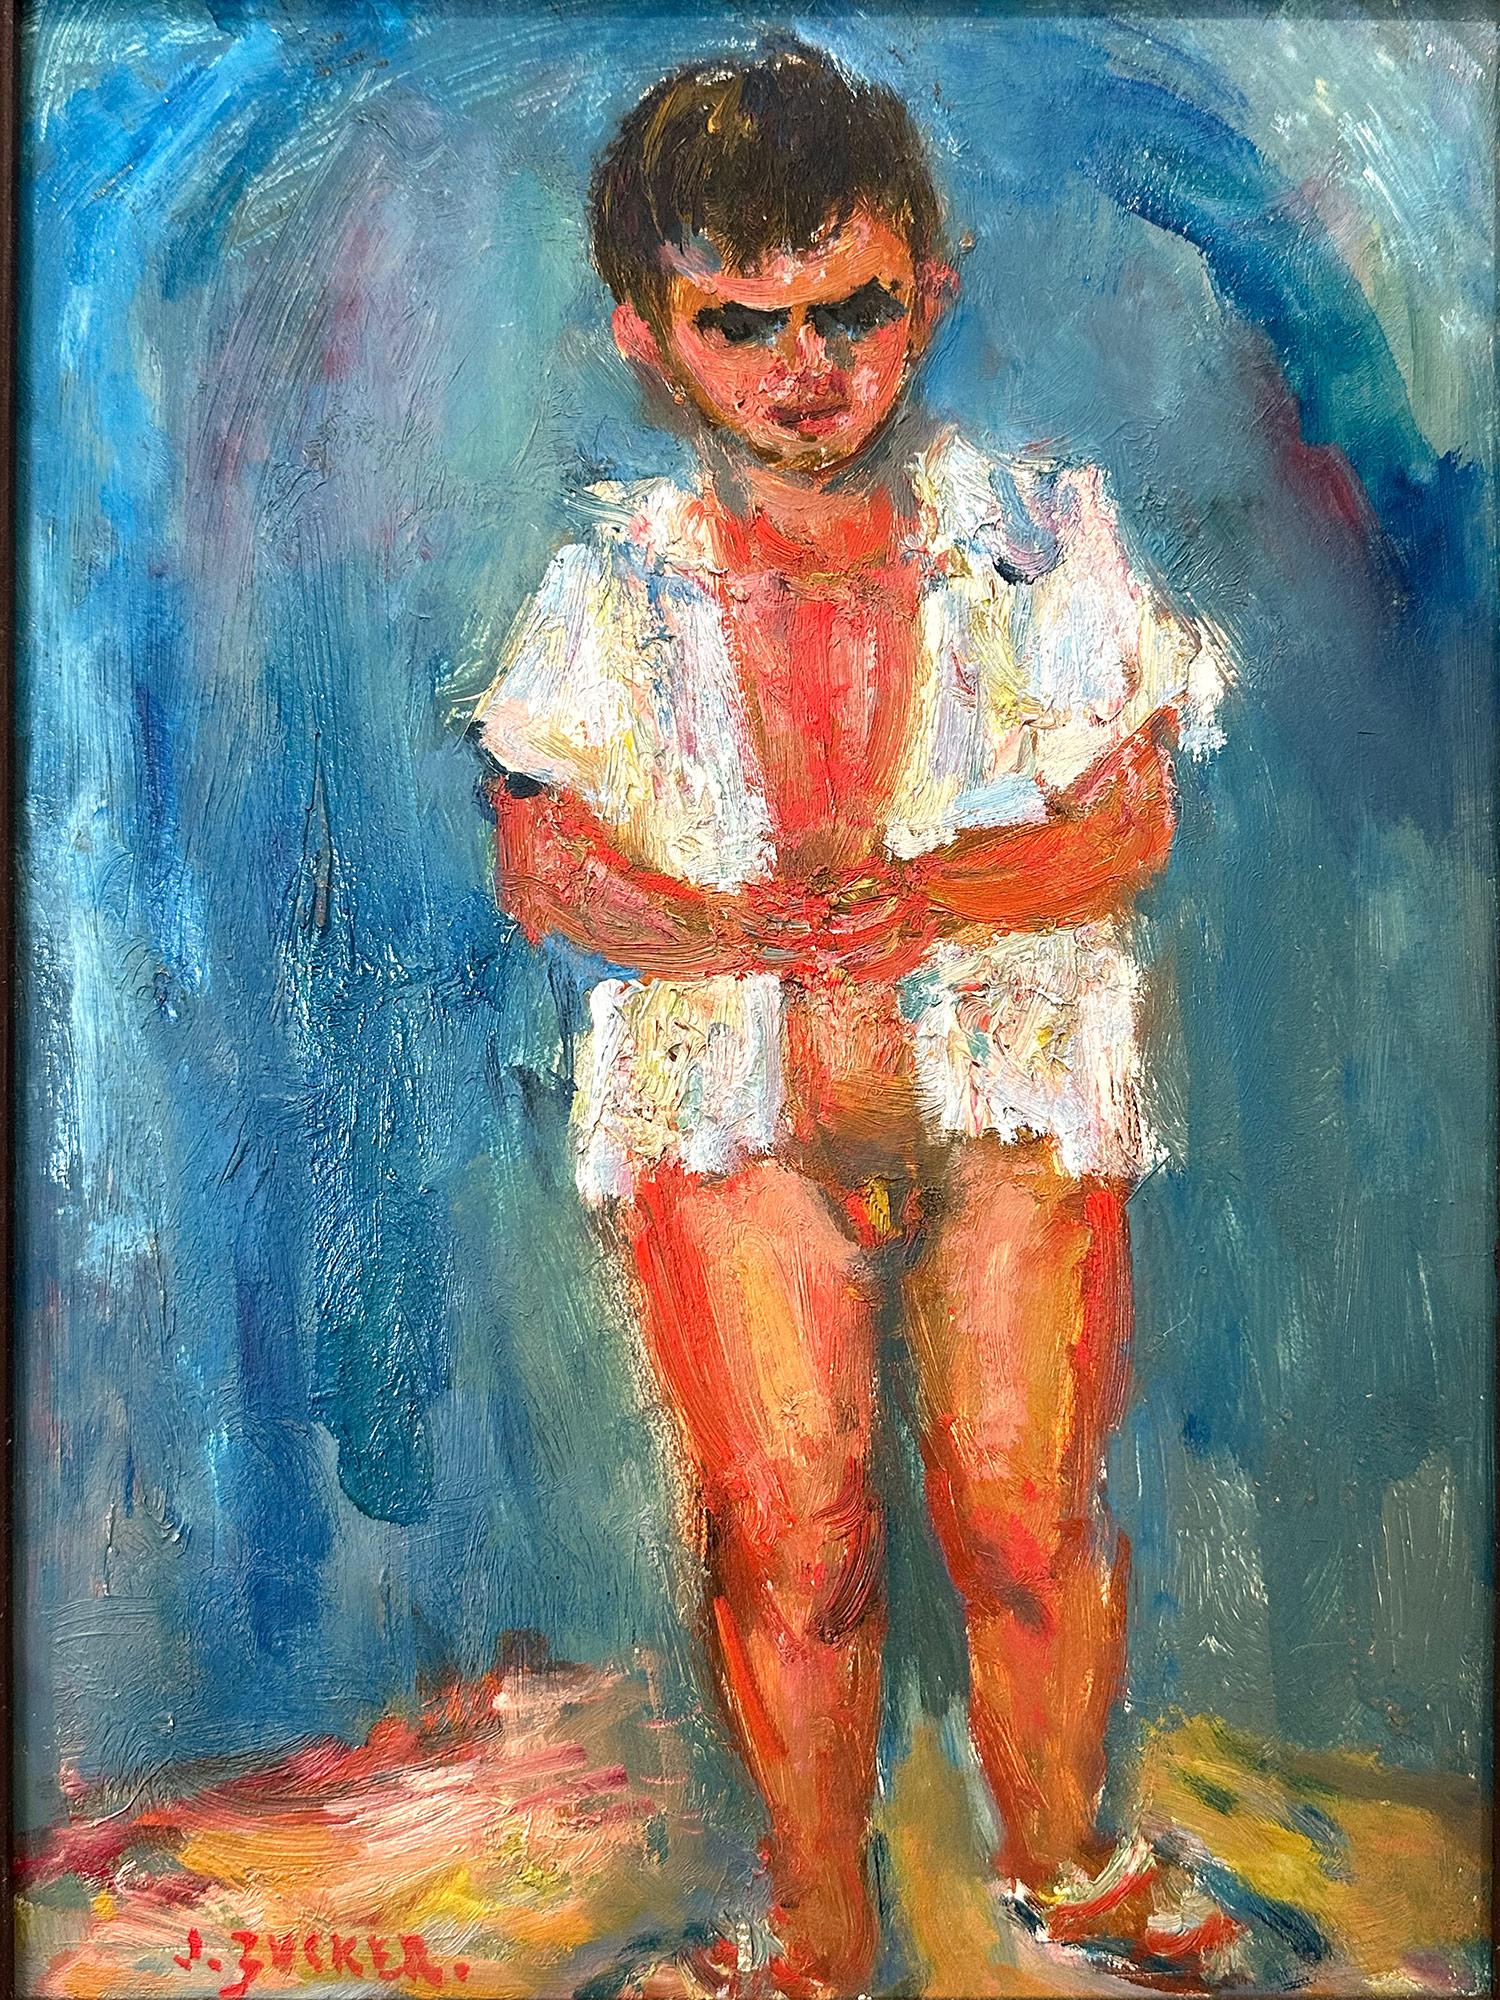 This painting depicts a whimsical scene of a nude boy wearing an open shirt and sandals. The bright colors and quick brush strokes are what makes this painting so attractive and desirable. The piece is done in a highly impressionistic manner and is